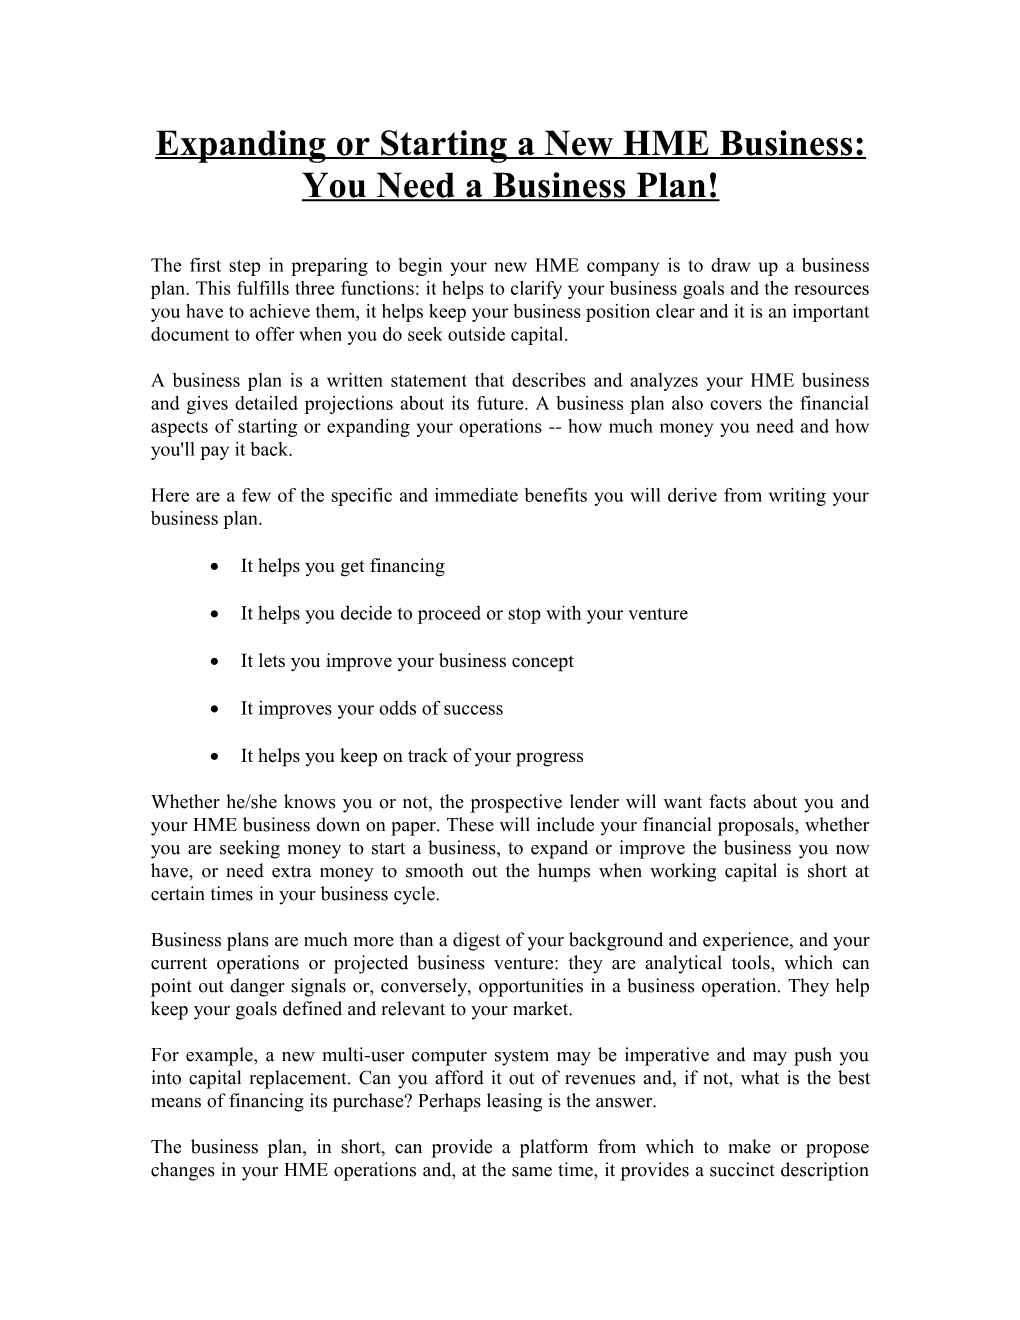 Expanding Or Starting a New HME Business: You Need a Business Plan